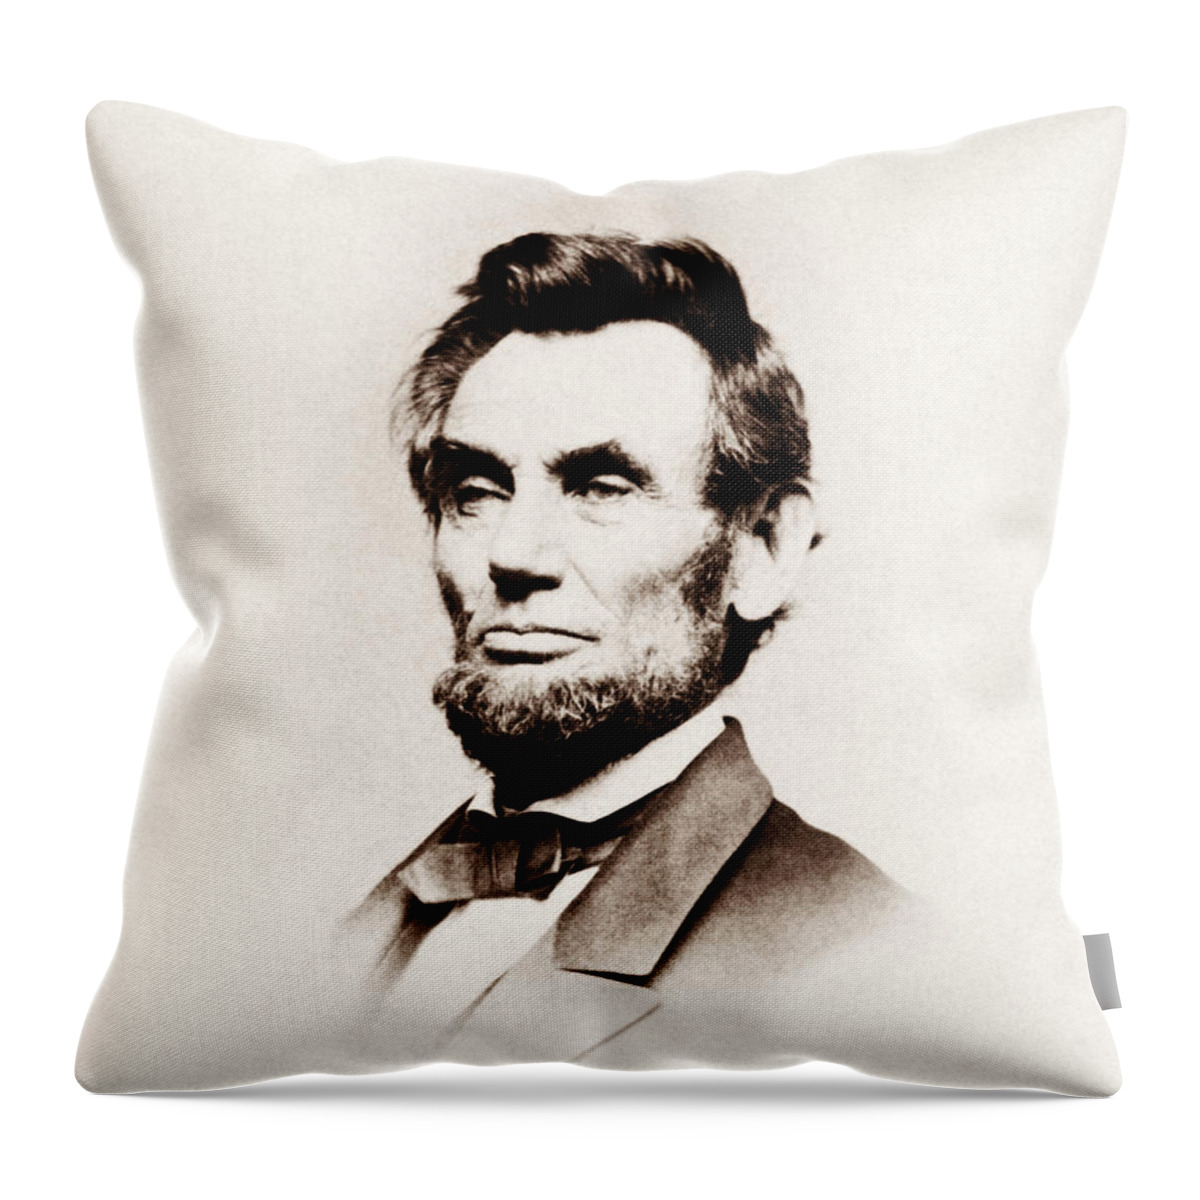 Abraham Lincoln Throw Pillow featuring the photograph Abraham Lincoln Portrait - Mathew Brady 1864 by War Is Hell Store